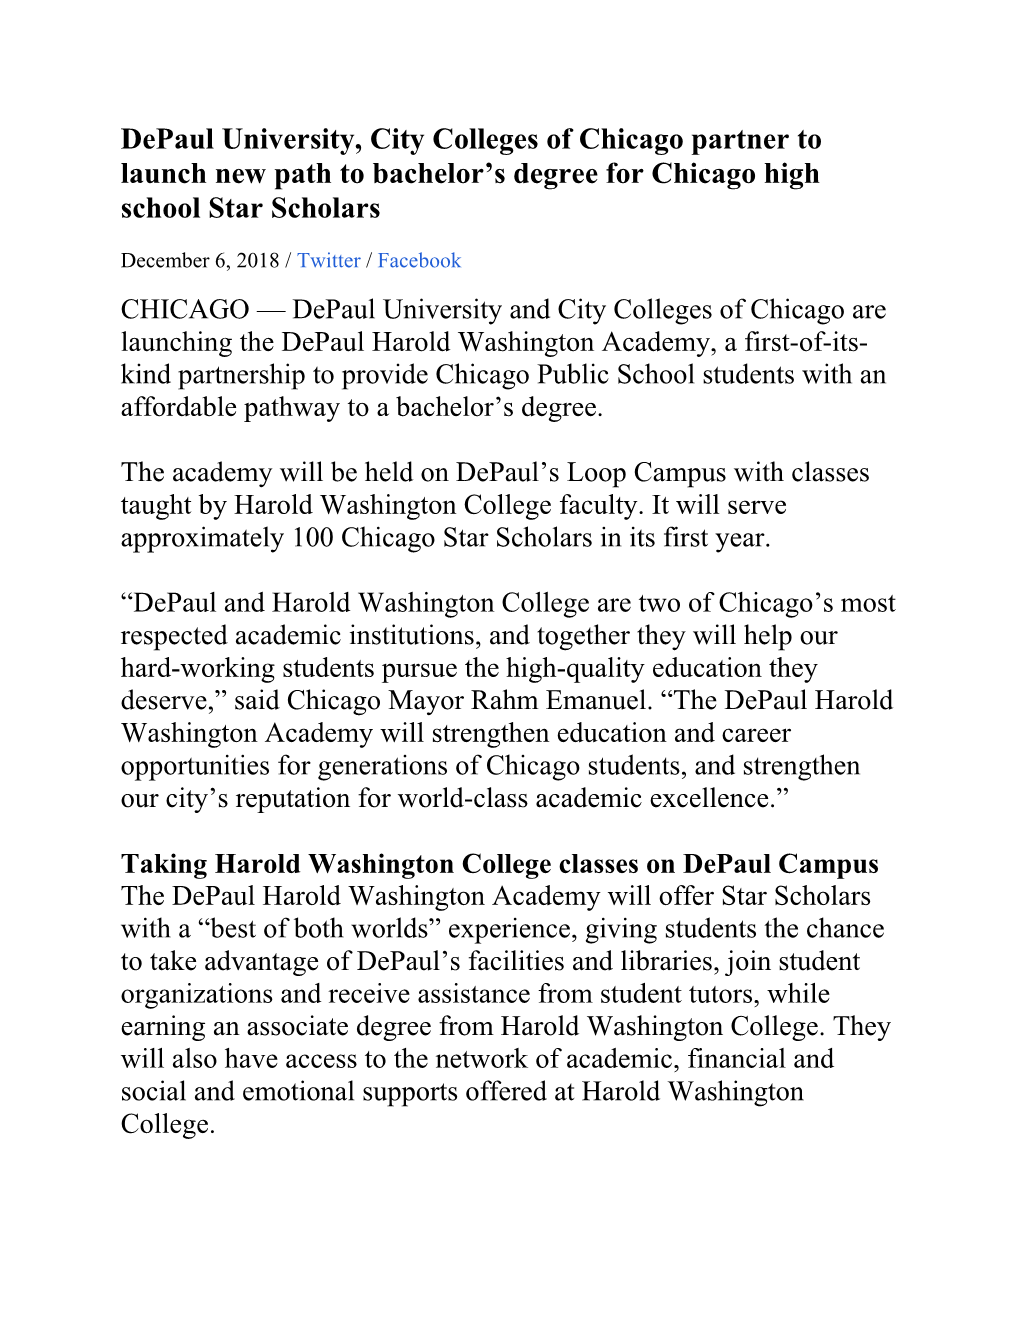 Depaul University, City Colleges of Chicago Partner to Launch New Path to Bachelor’S Degree for Chicago High School Star Scholars